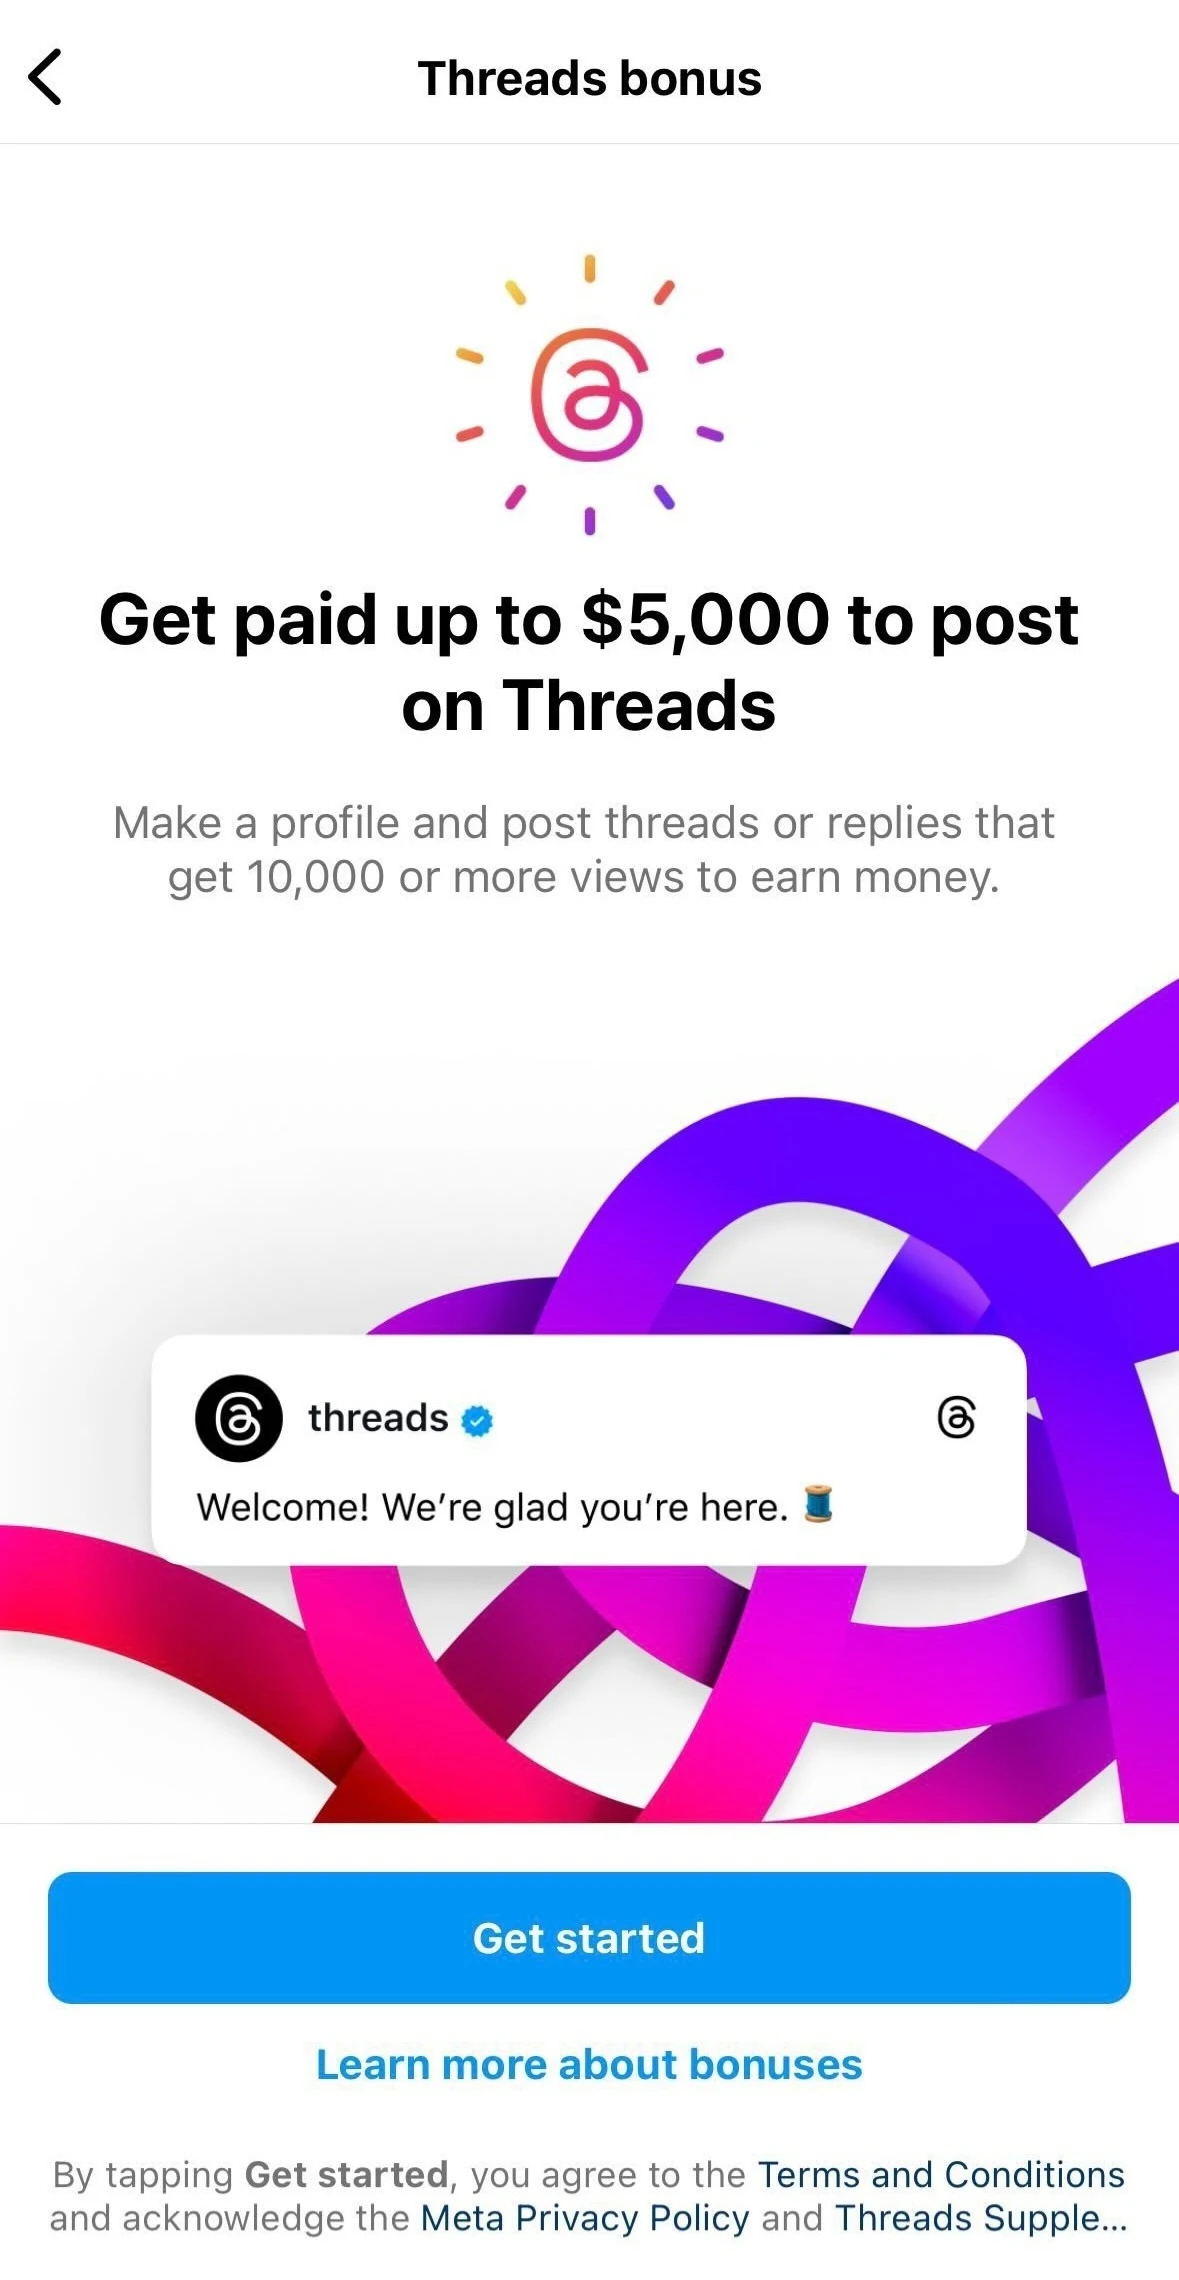 Top Creators to Earn $5,000 for Posting on Threads